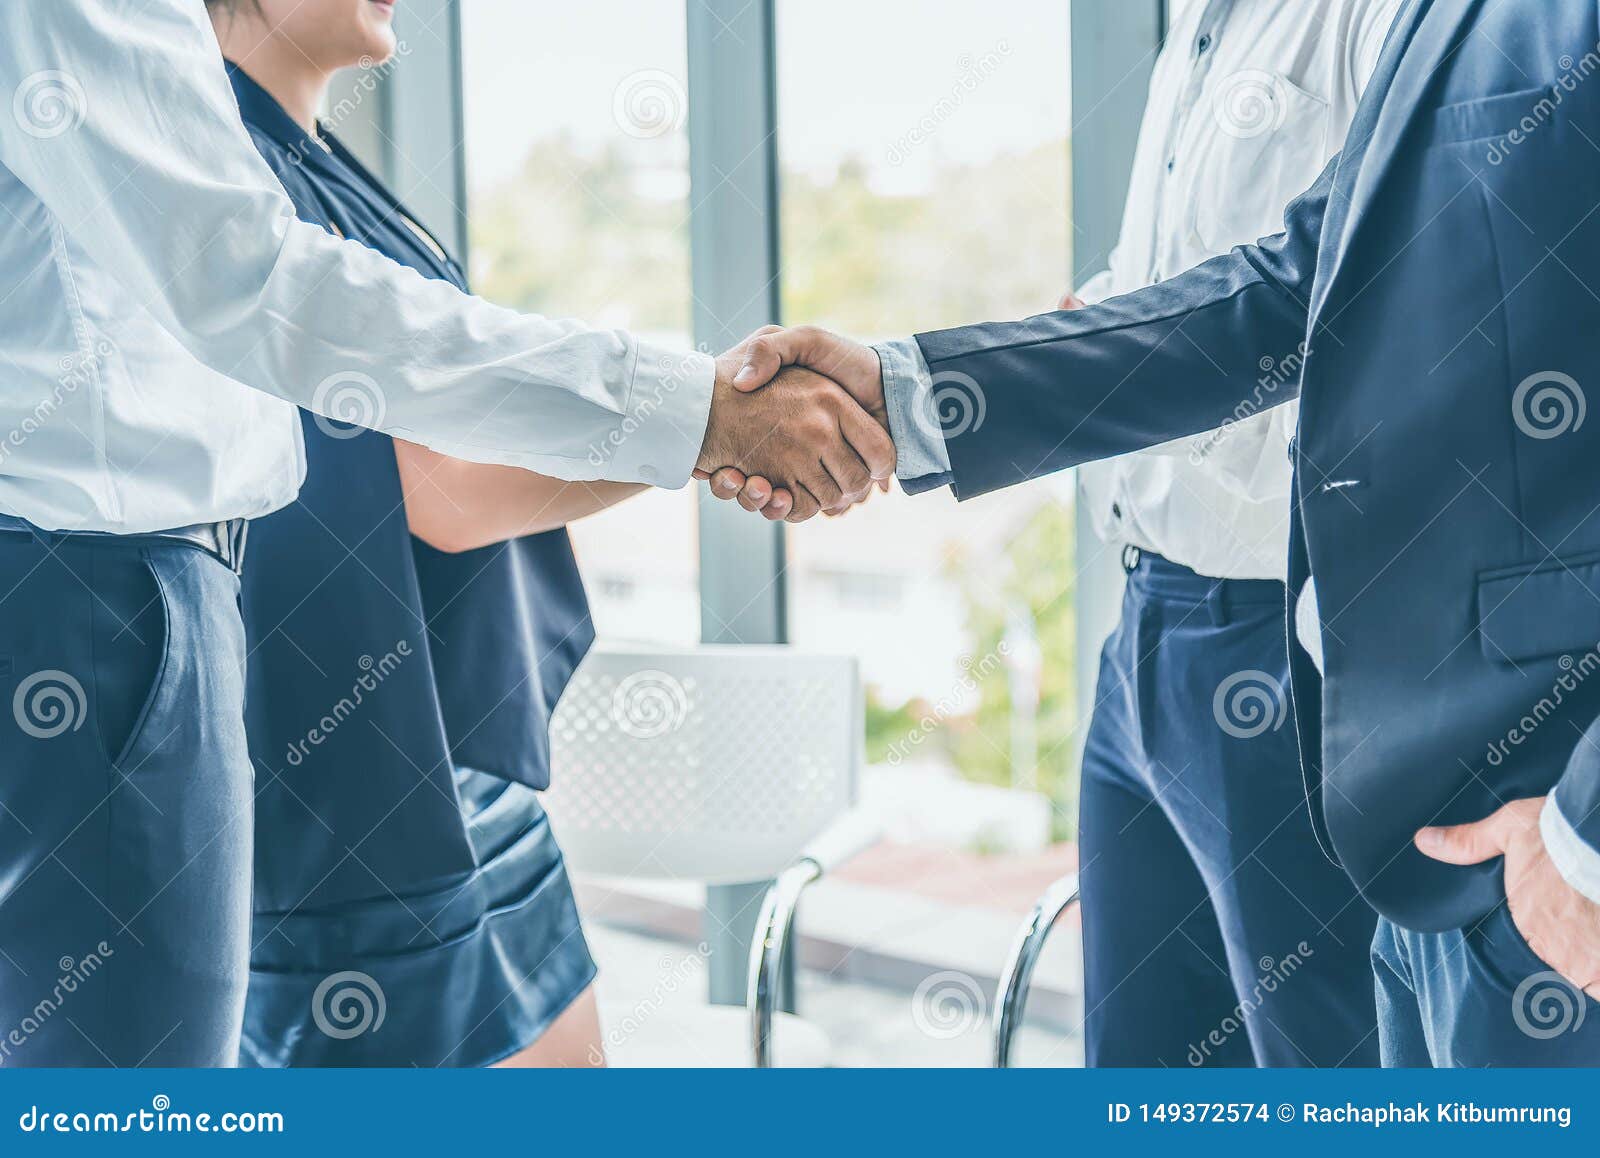 businessman hand shake after the new project meeting. business agreement concept